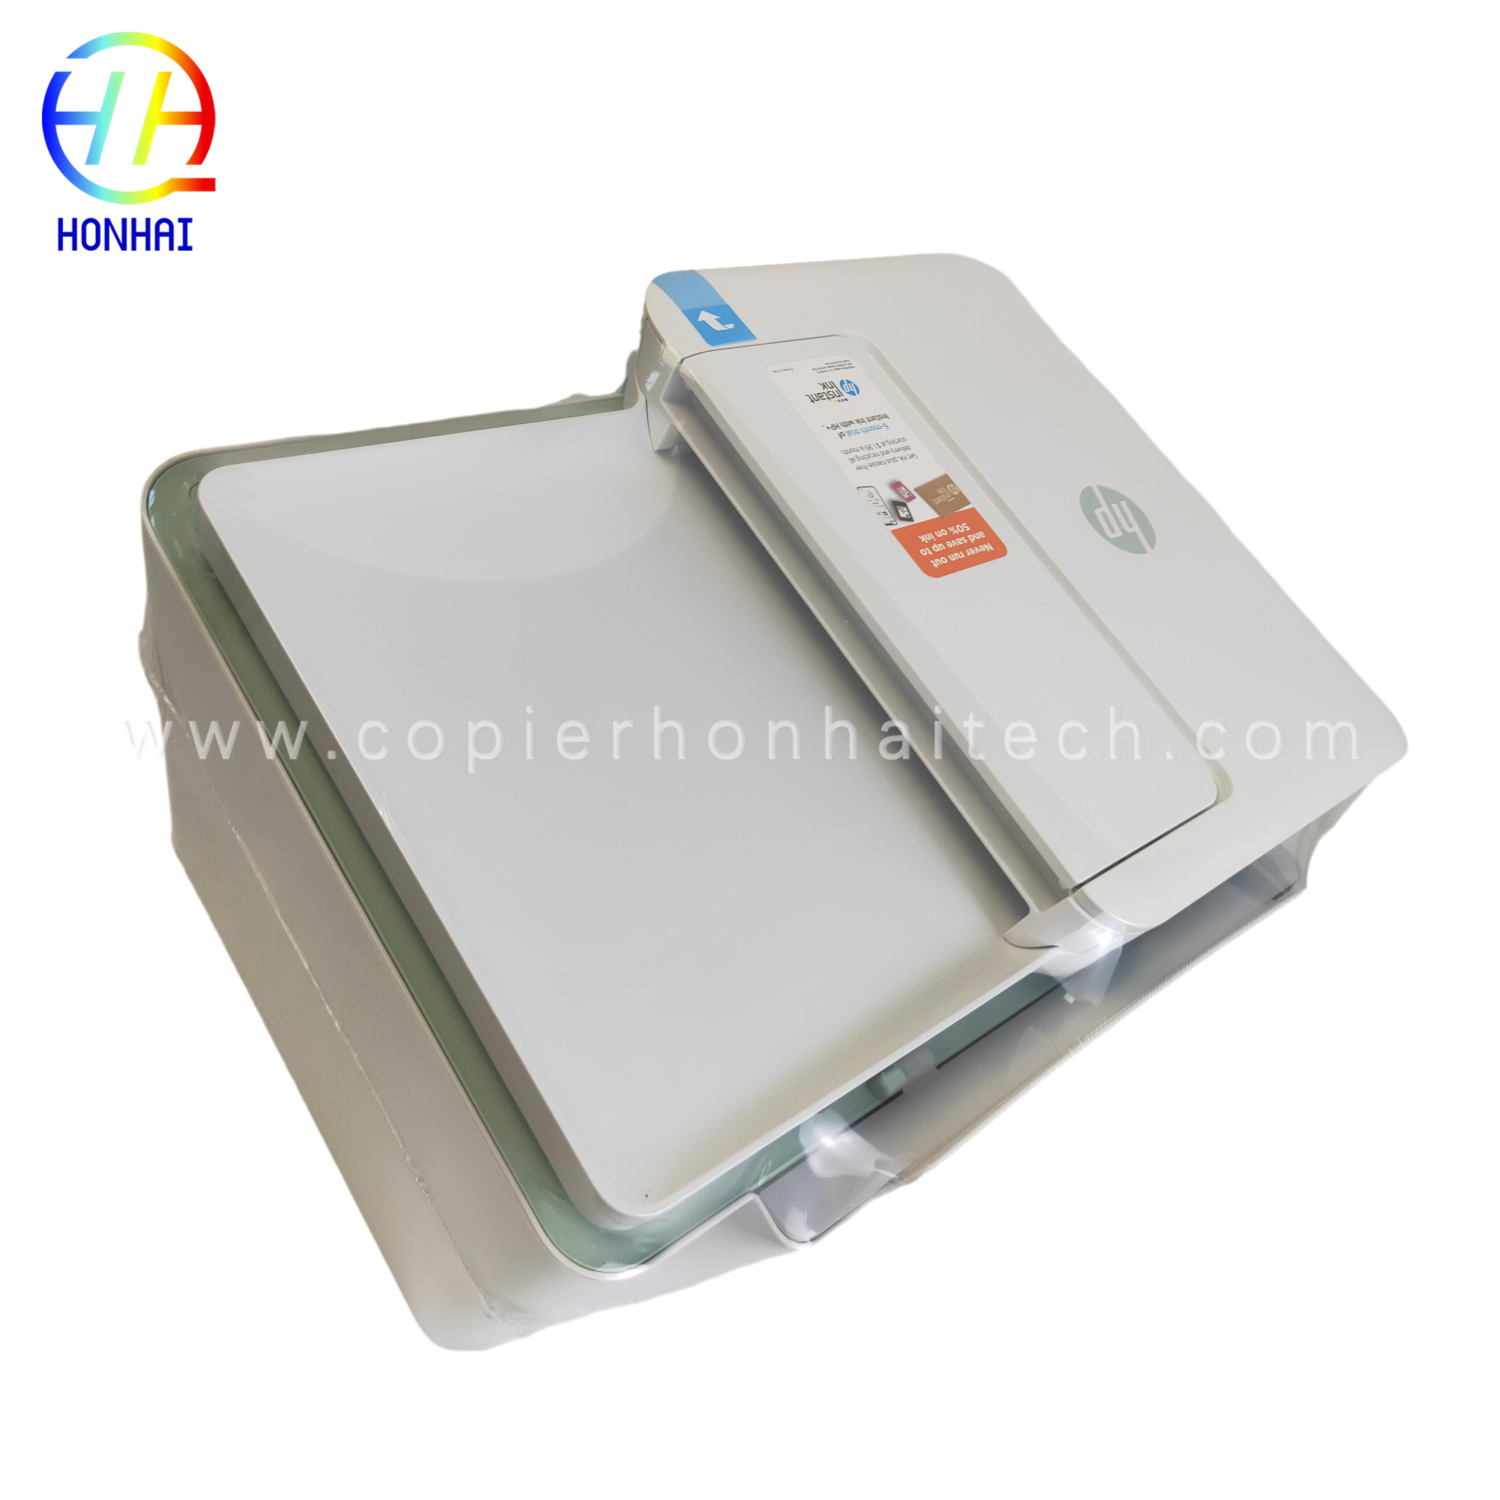 https://www.copierhonhaitech.com/original-new-wireless-printer-for-hp-deskjet-4122e-all-in-one-printer-scan-and-copy-home-office-students-and-home- printer-26q96a-produk/